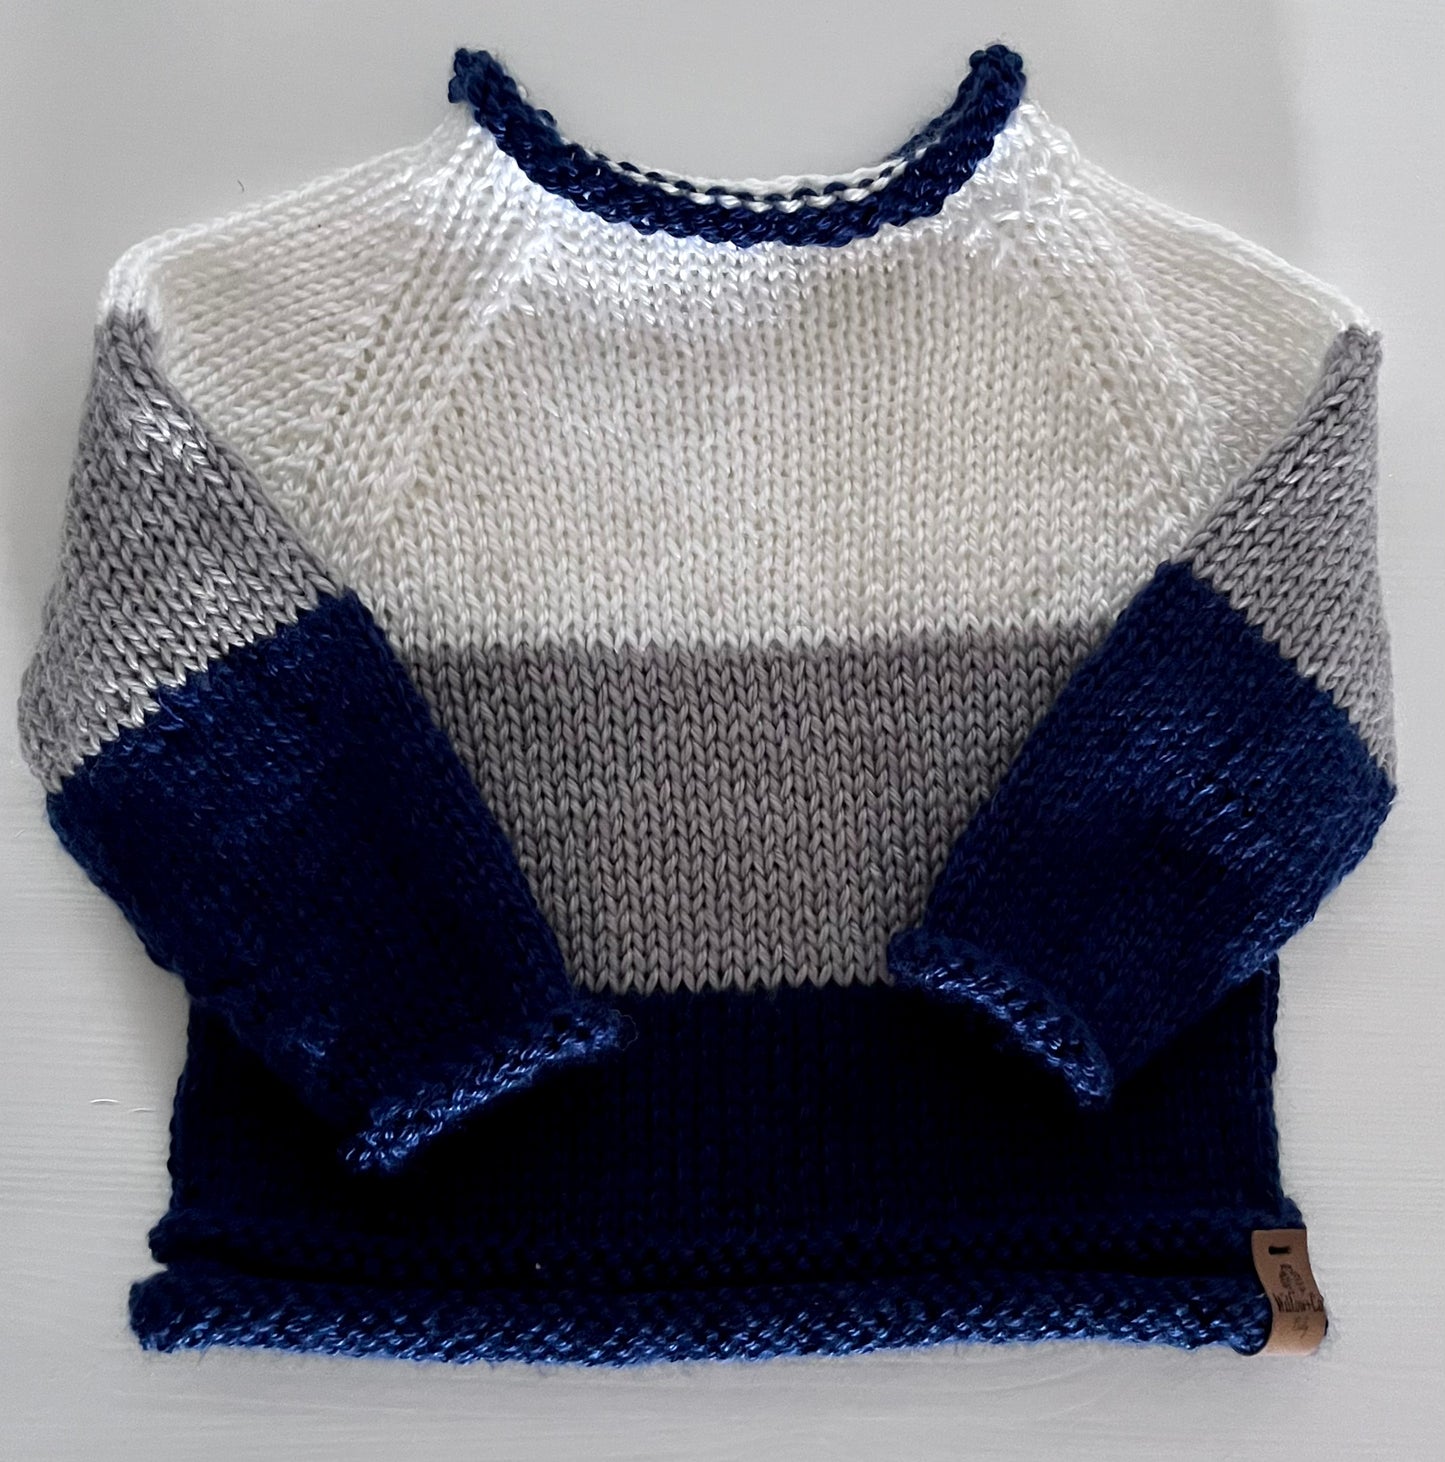 HAND KNITTED JUMPER - WHITE, GREY AND NAVY STRIPE